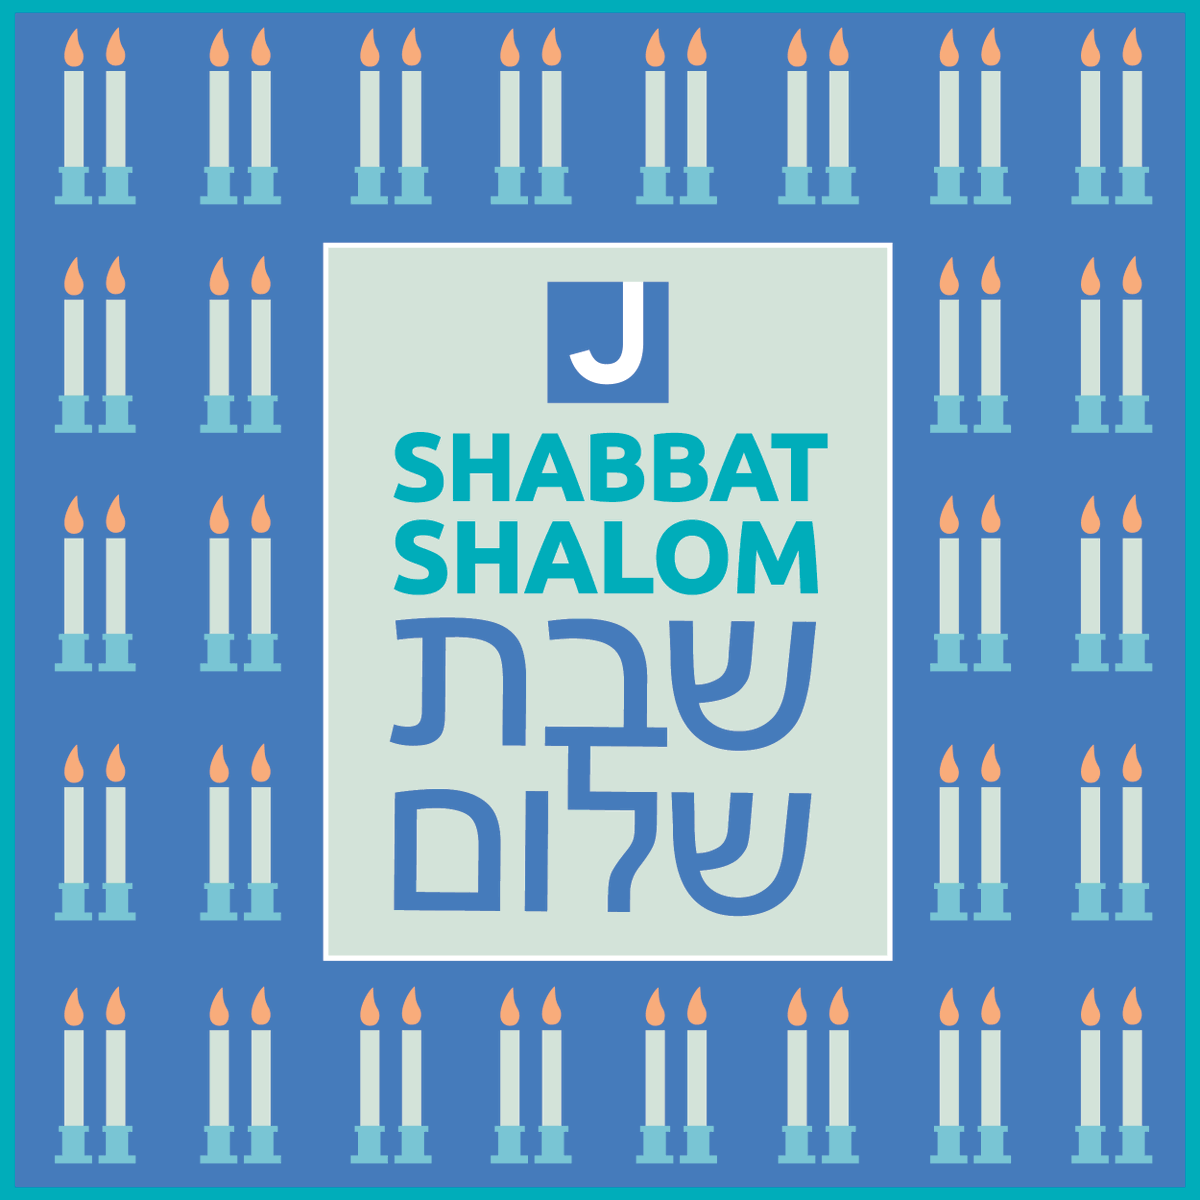 🕯️✨ #ShabbatShalom, friends! ✨🕯️

As the sun sets and a sense of peace fills the air, let's take a moment to pause, reflect and have a meaningful #Shabbat.

🙏🕊️
#weekendvibes #PeaceAndLove #TimeToUnwind #jccmargate #margatejcc